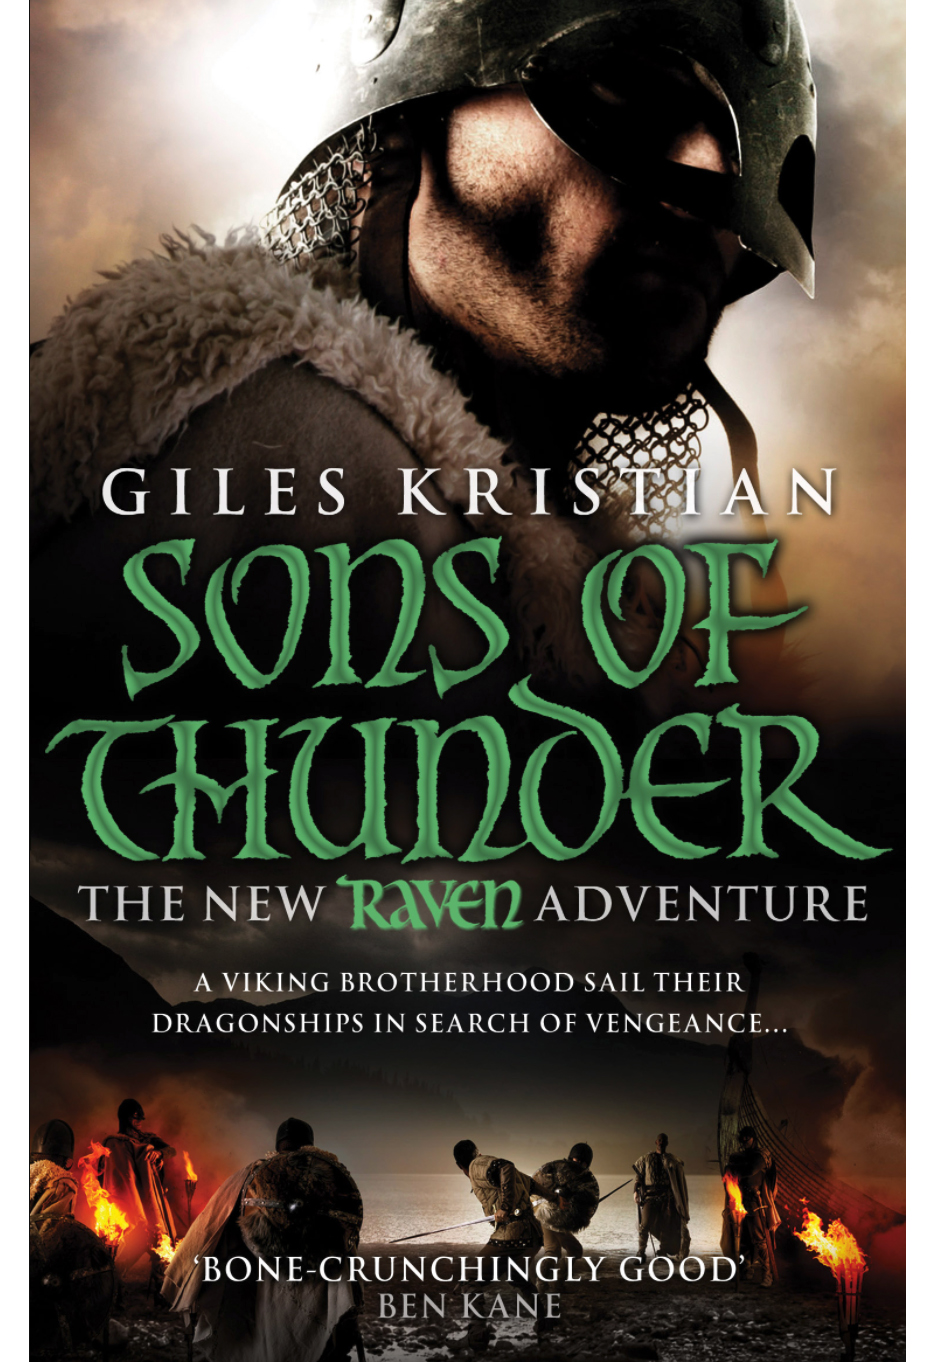 Sons of Thunder by Giles Kristian